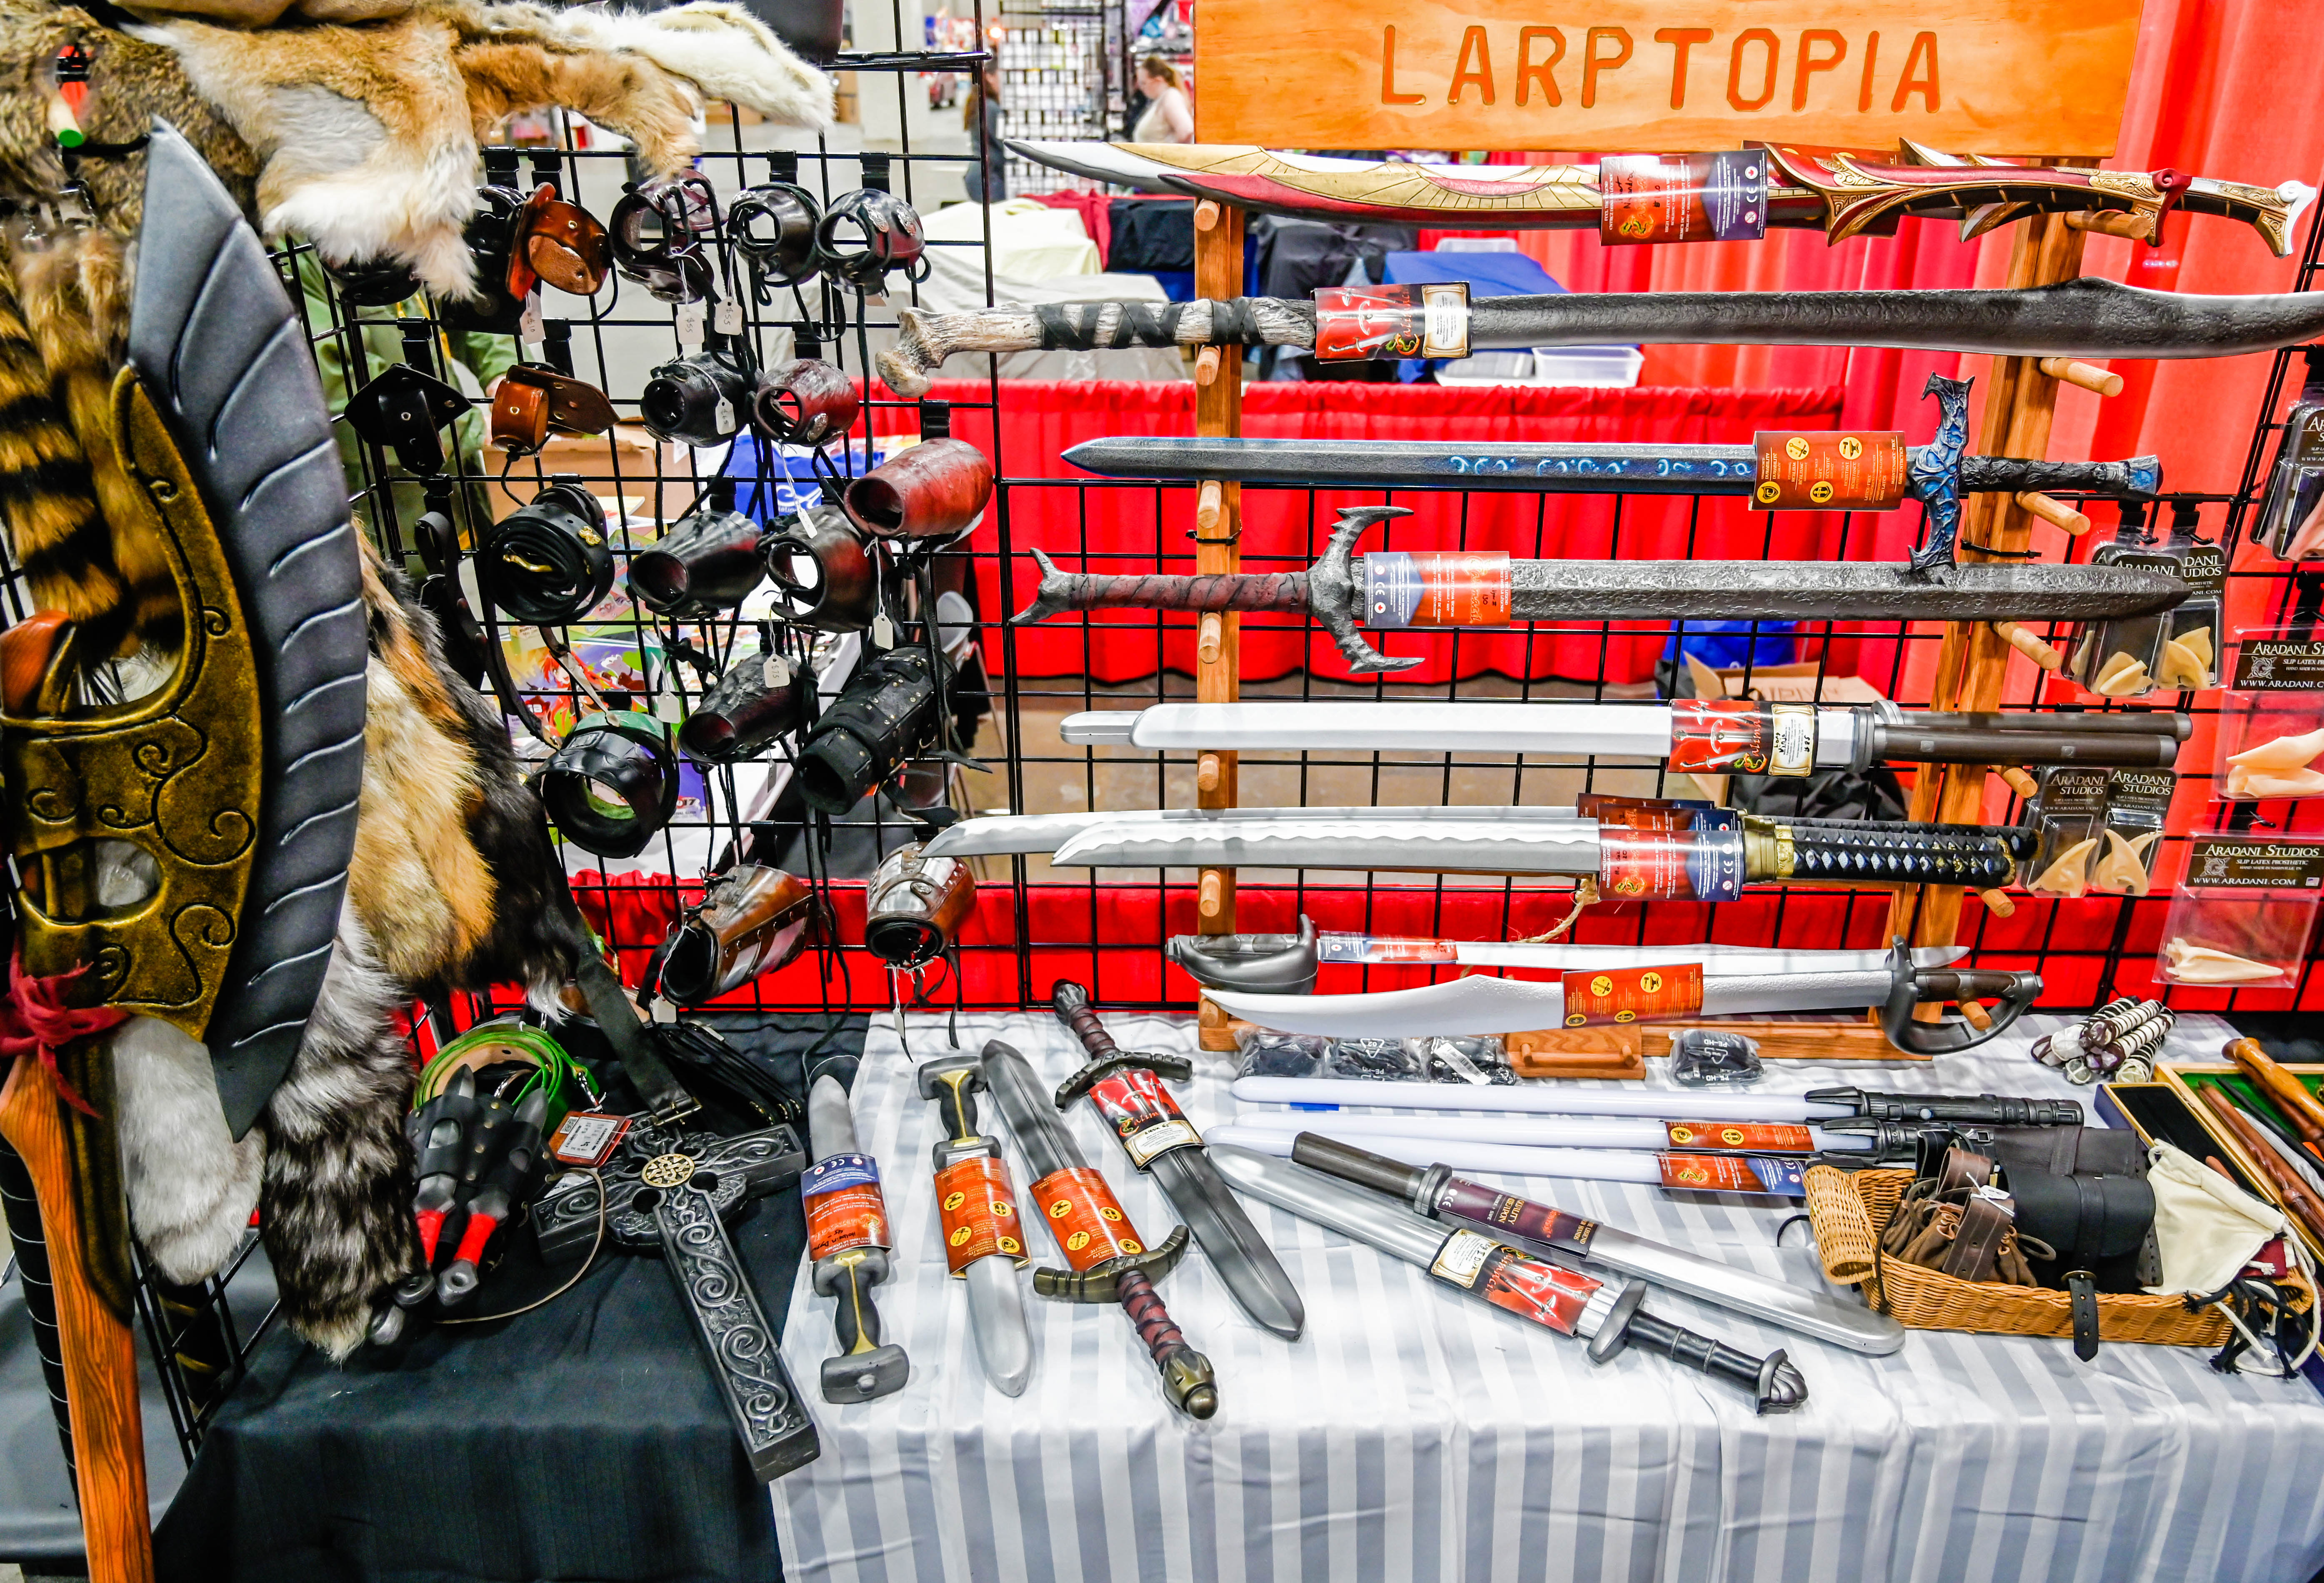 larptopia weapons and wares at youmacon 2019 with leather bracers, sword frogs, calimacil daggers, epic armoury axe, and fur tails